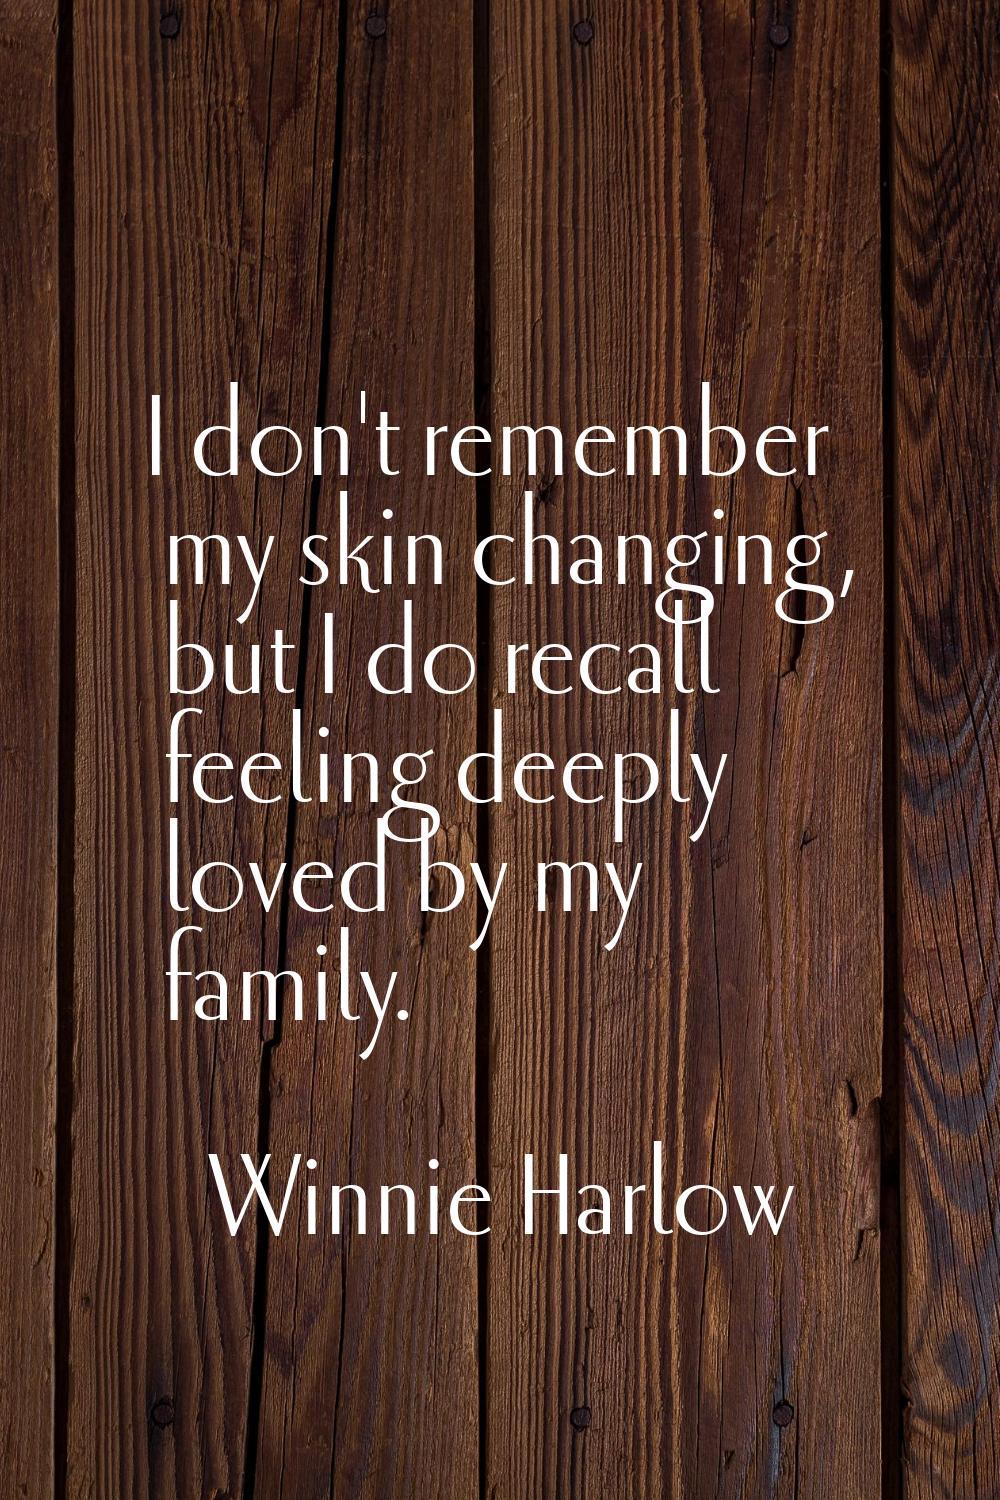 I don't remember my skin changing, but I do recall feeling deeply loved by my family.